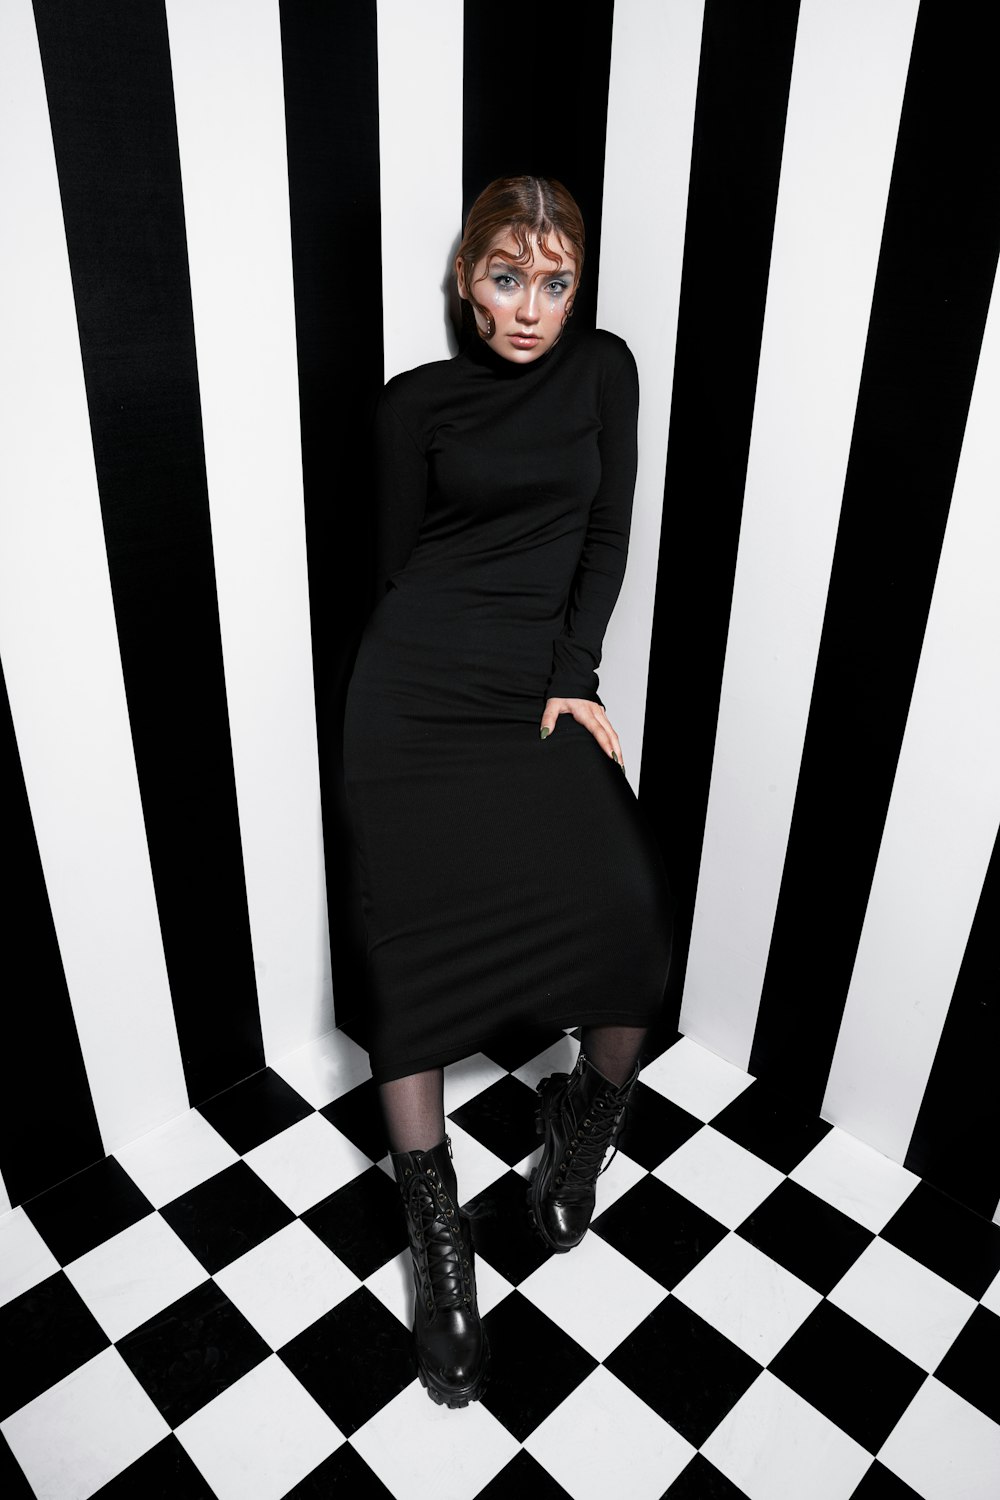 a woman in a black and white striped room